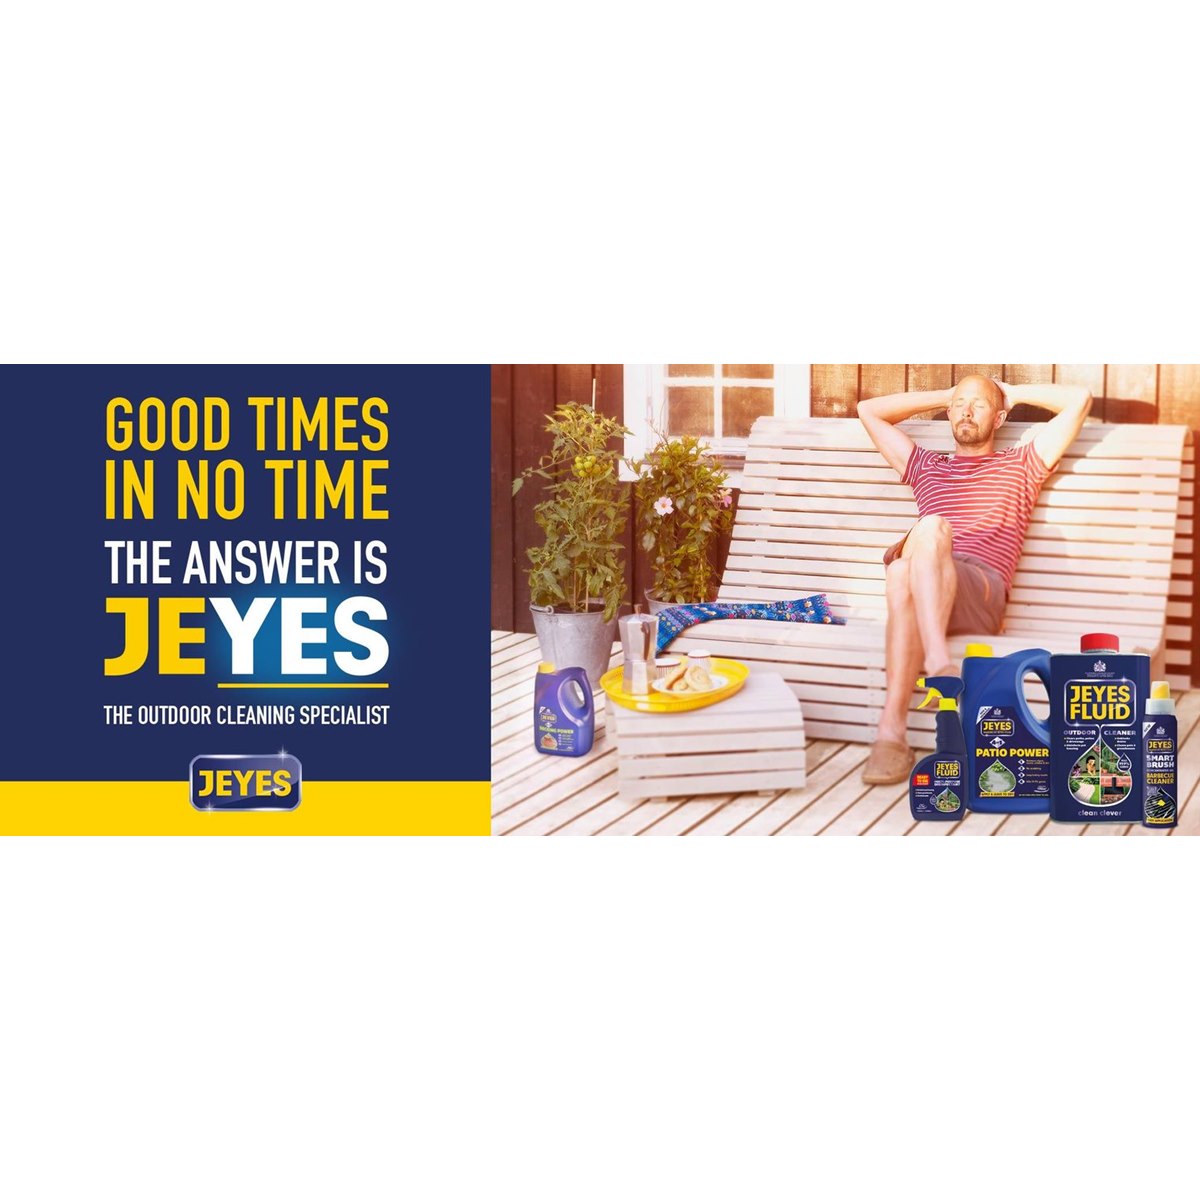 Where to Buy Jeyes Products